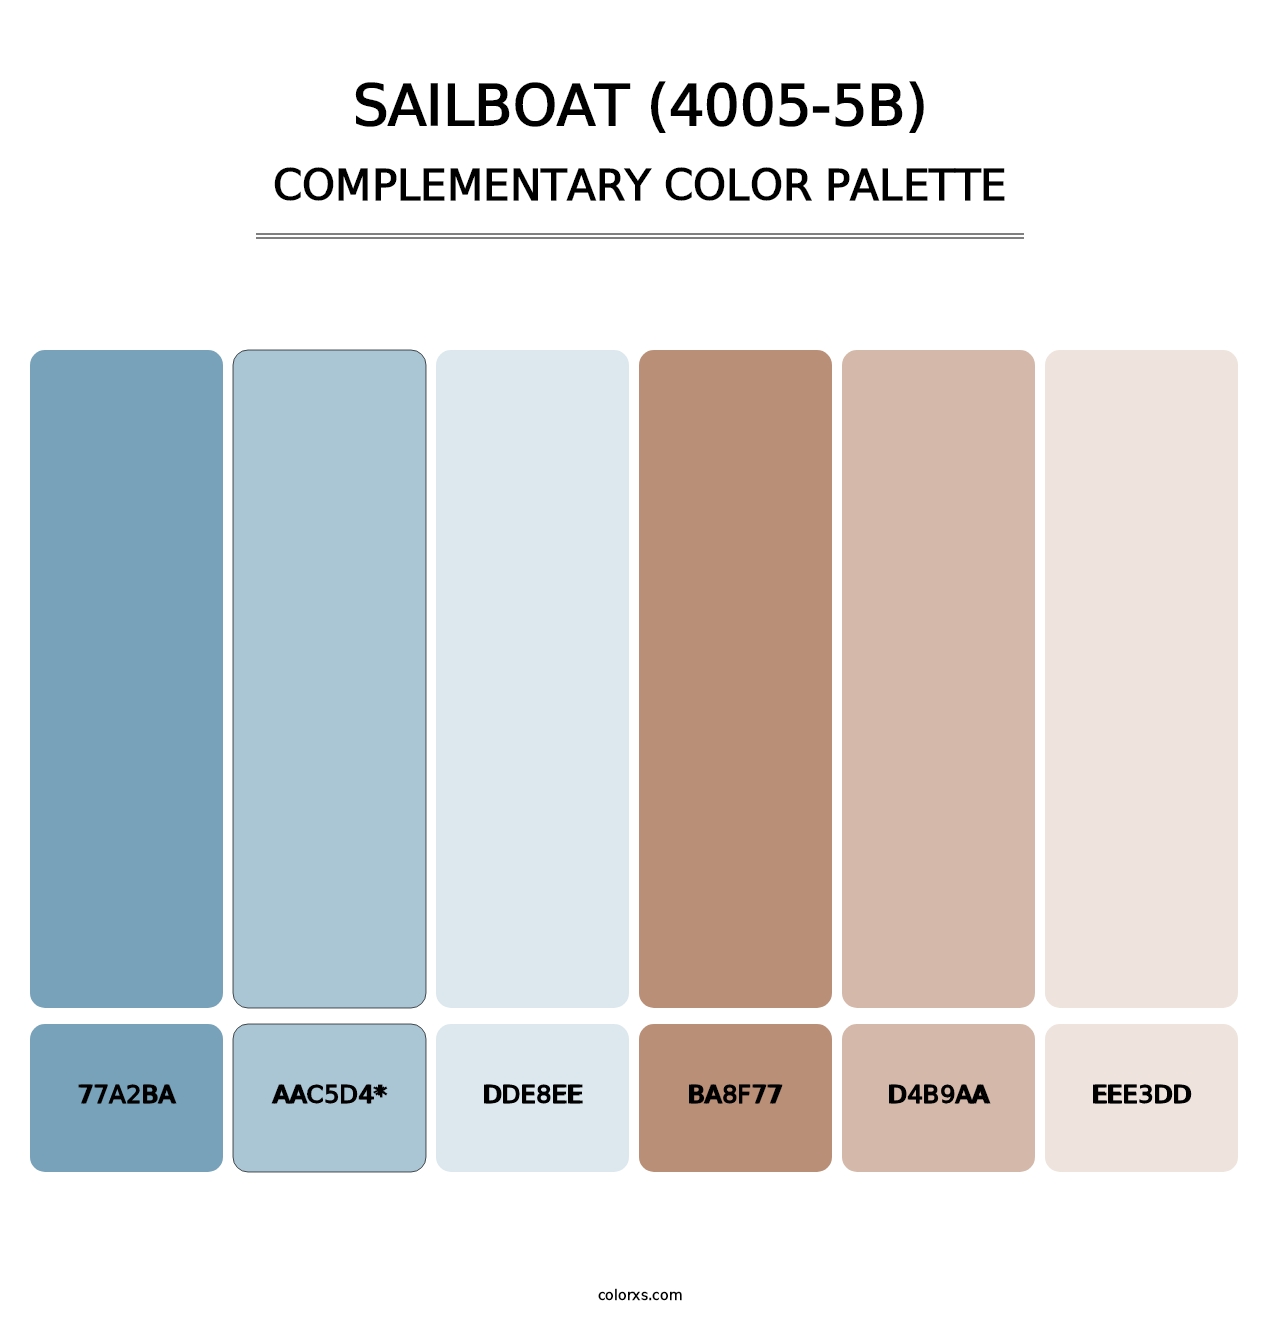 Sailboat (4005-5B) - Complementary Color Palette